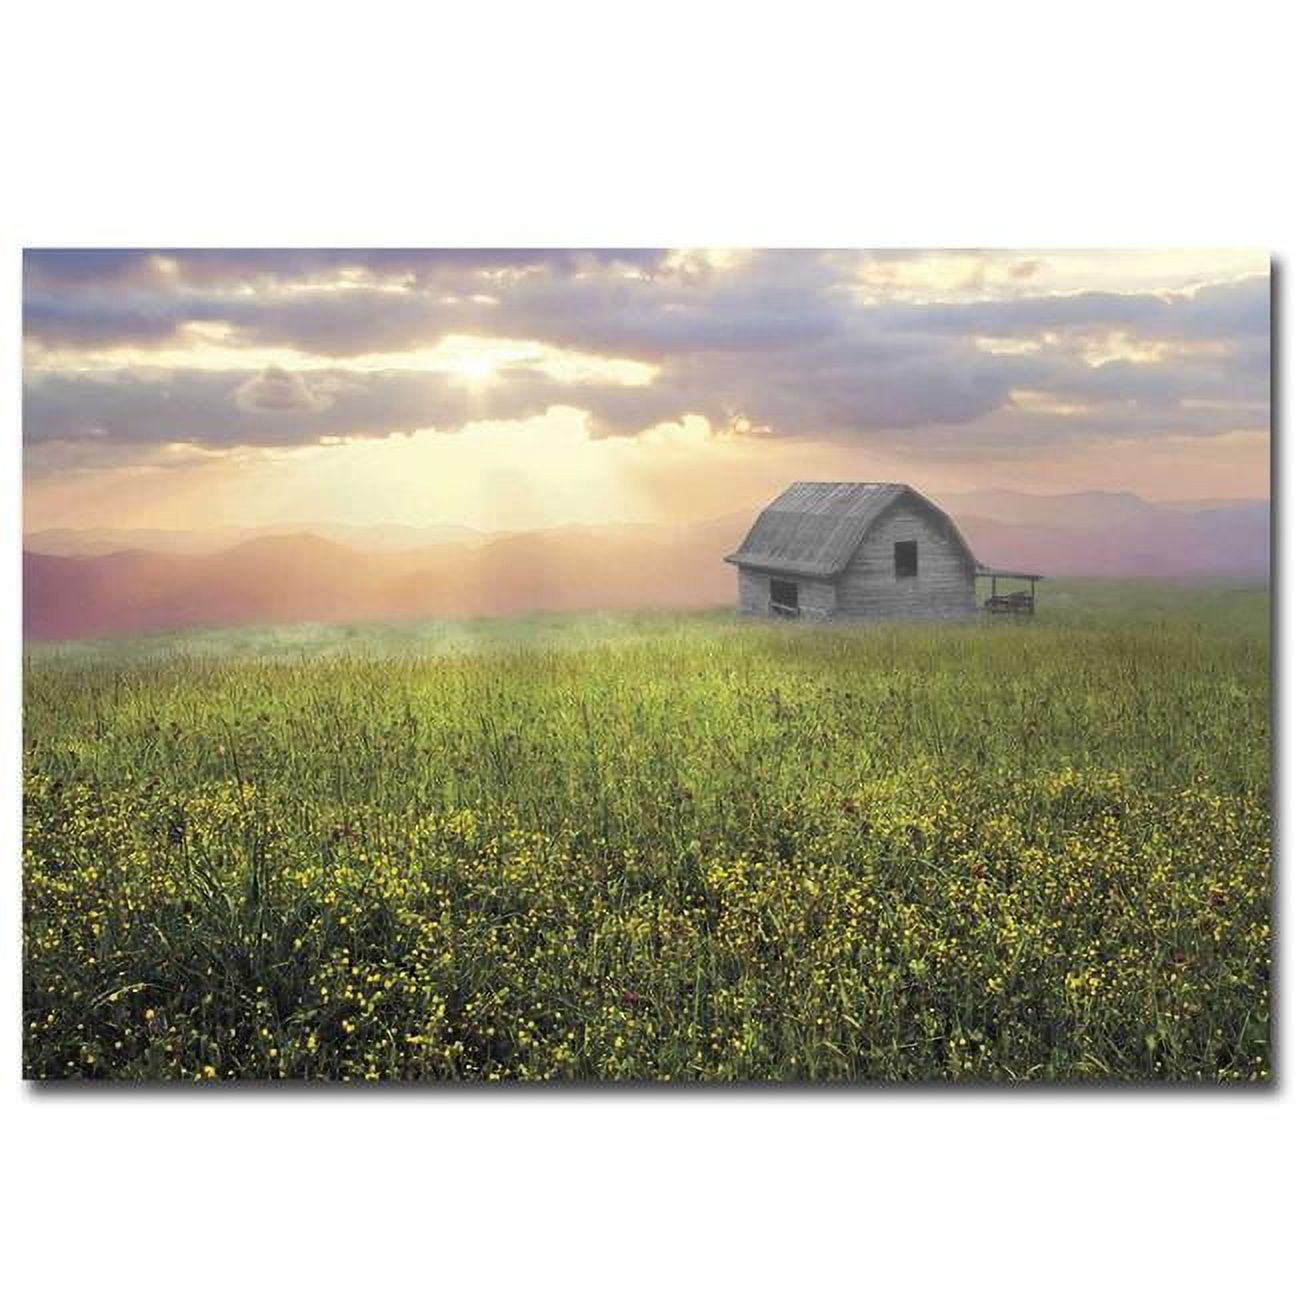 1624i795cg Morning Has Broken By Celebrate Life Gallery Premium Gallery-wrapped Canvas Giclee Panorama Art - 16 X 24 X 1.5 In.